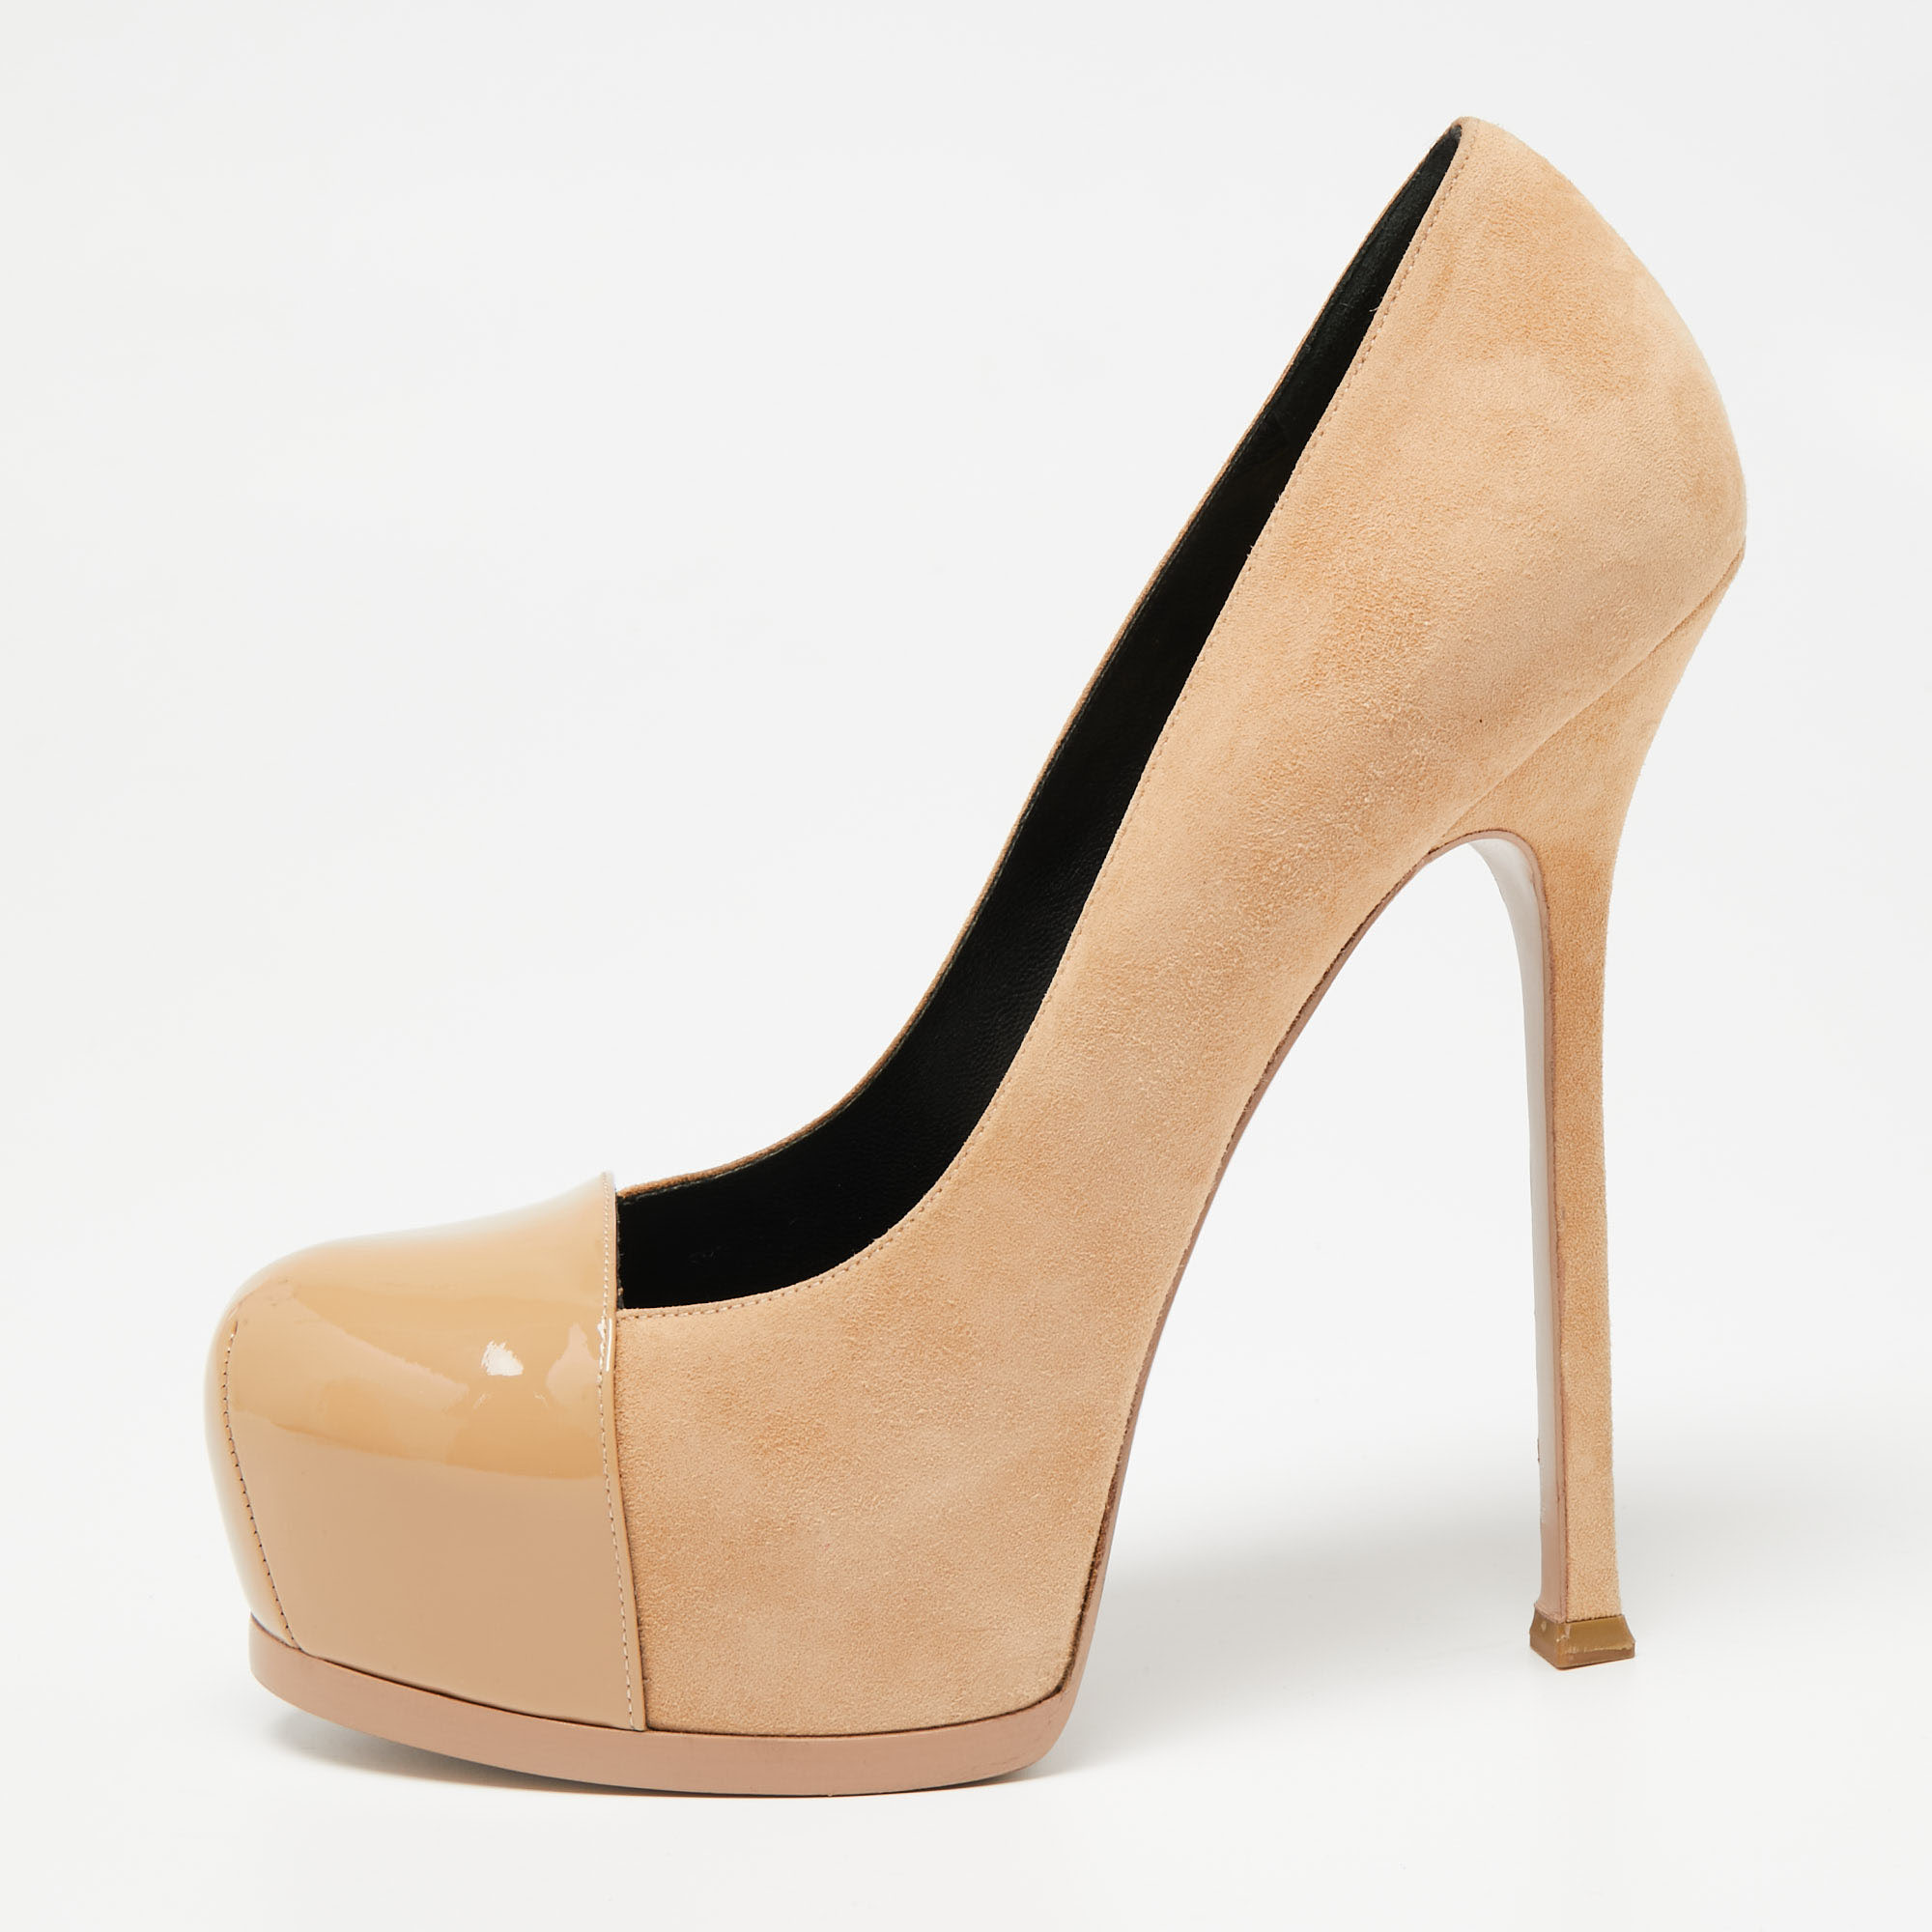 Fashionable and chic these Tribtoo pumps from Saint Laurent will cut an alluring silhouette from day to night. Crafted from patent leather and suede the pumps have a beige shade concealed platforms and 15.5 cm heels.